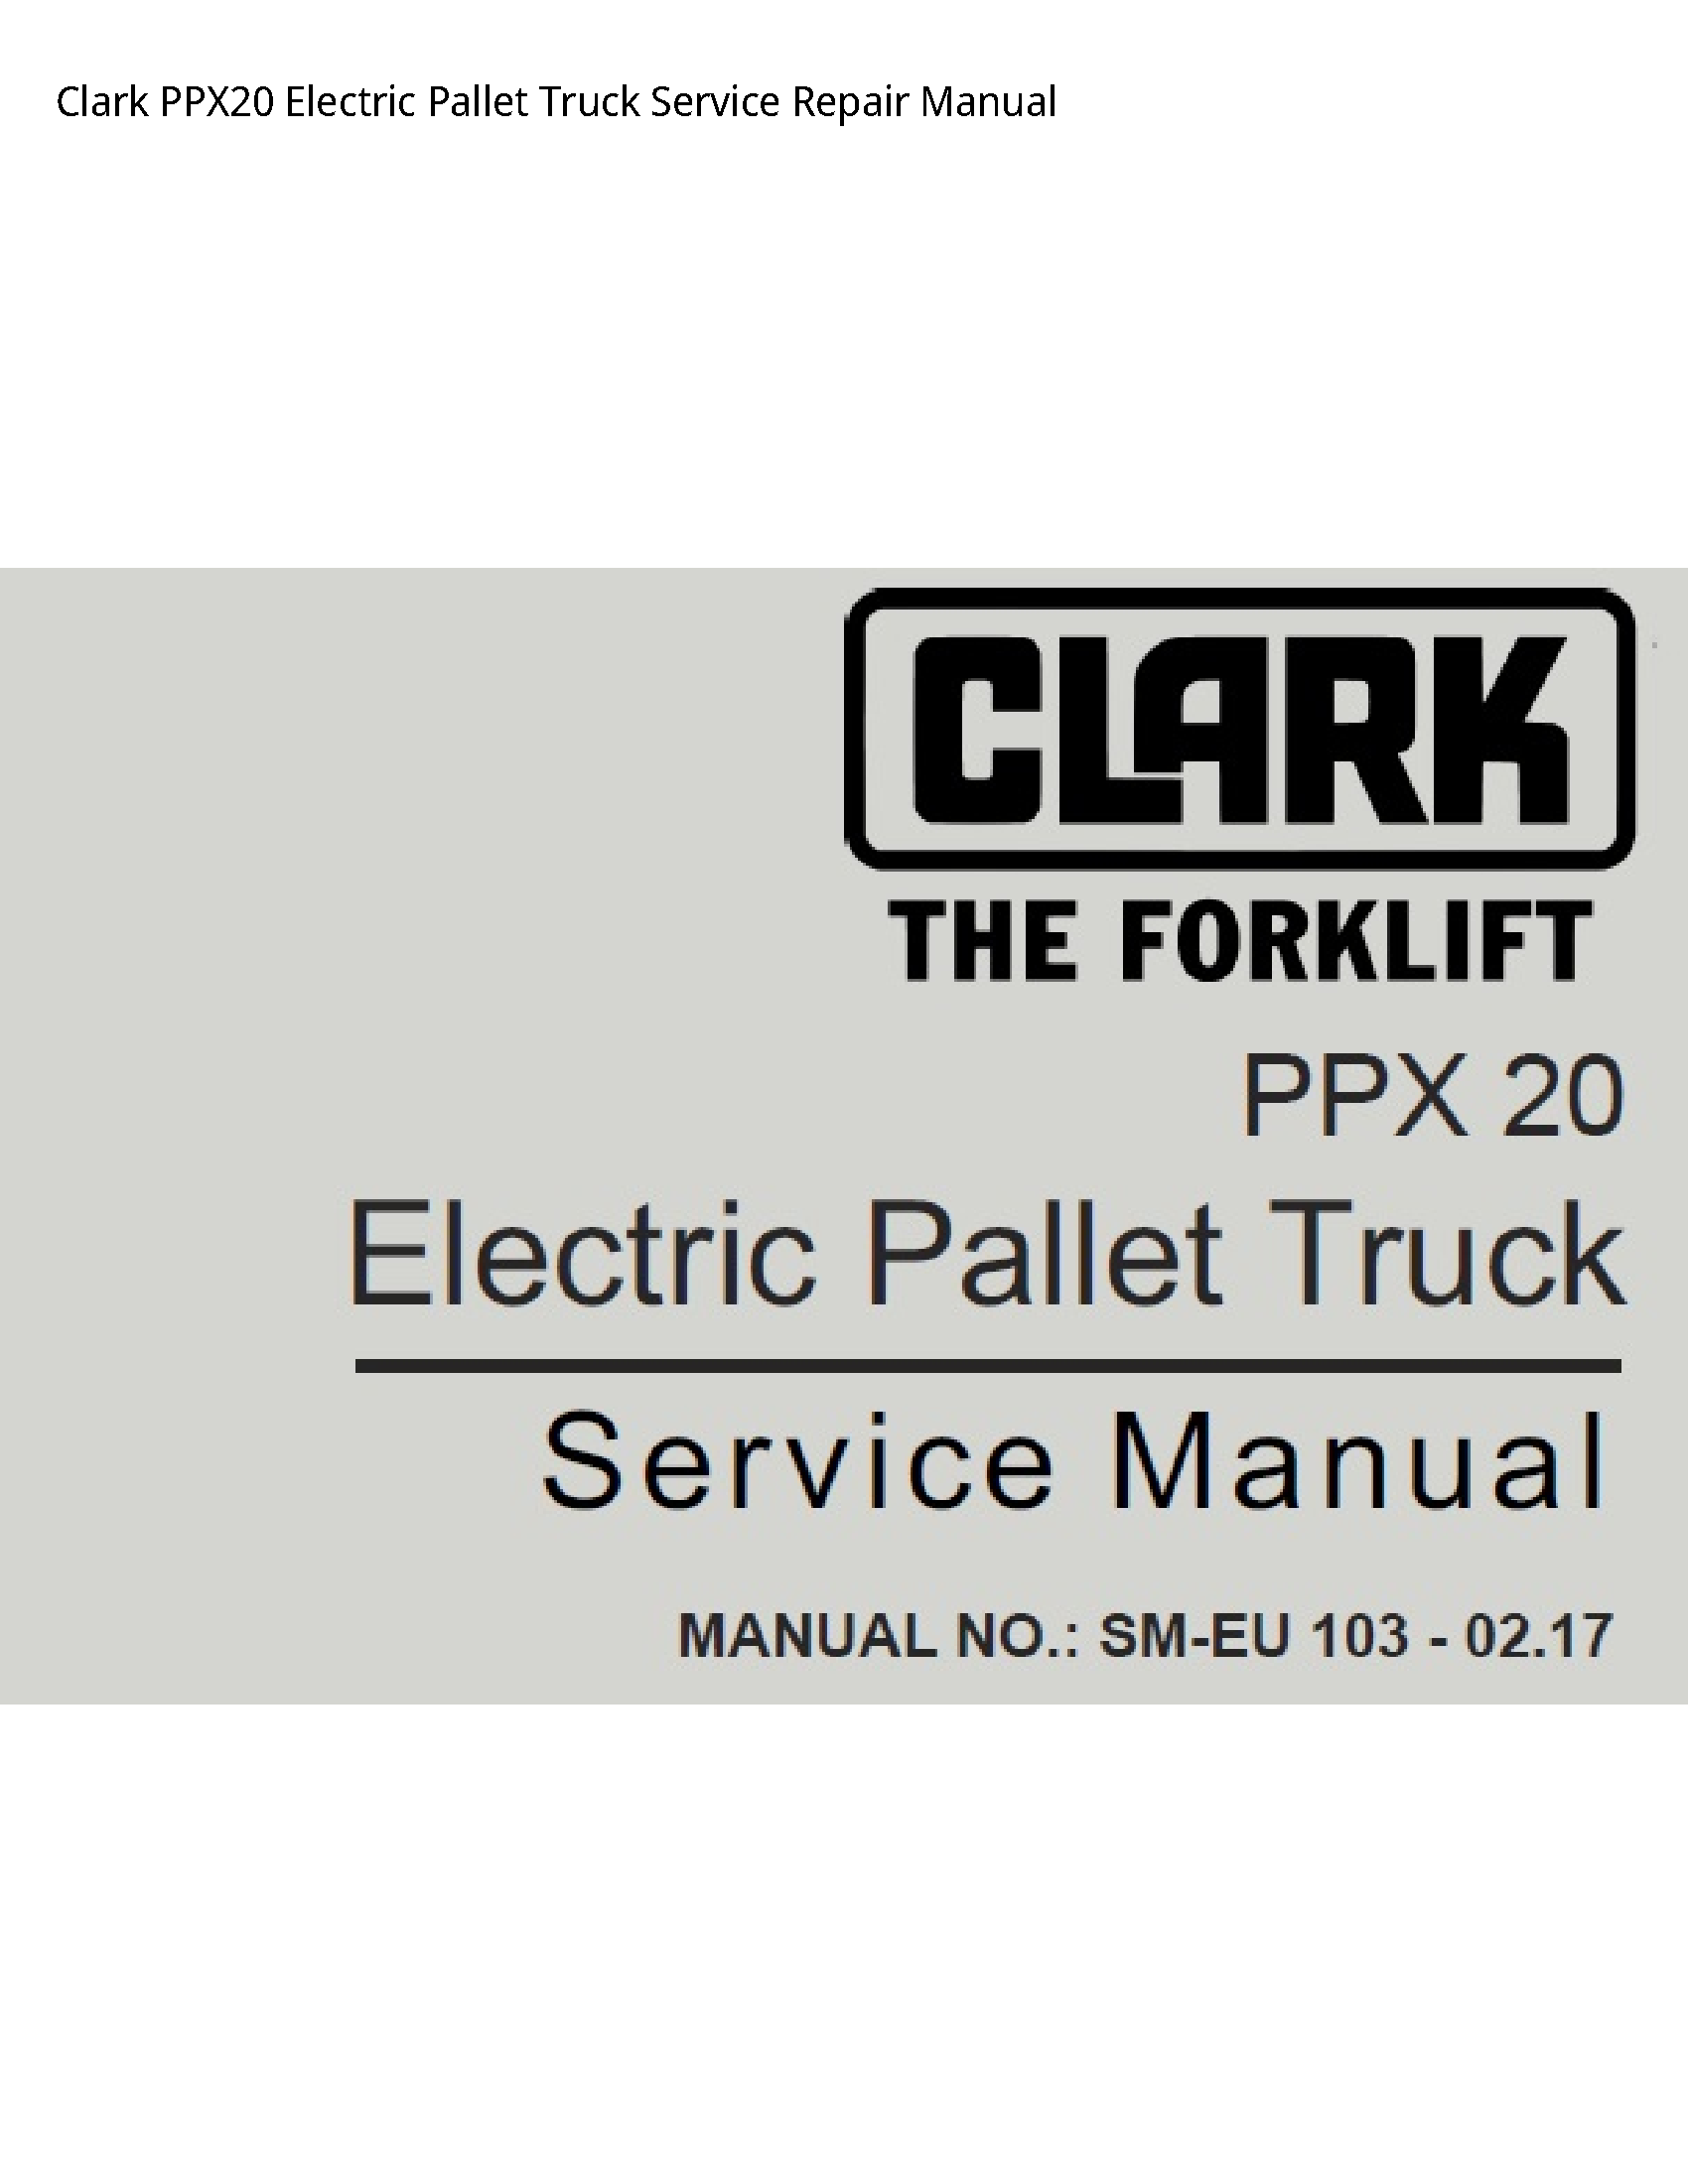 Clark PPX20 Electric Pallet Truck manual